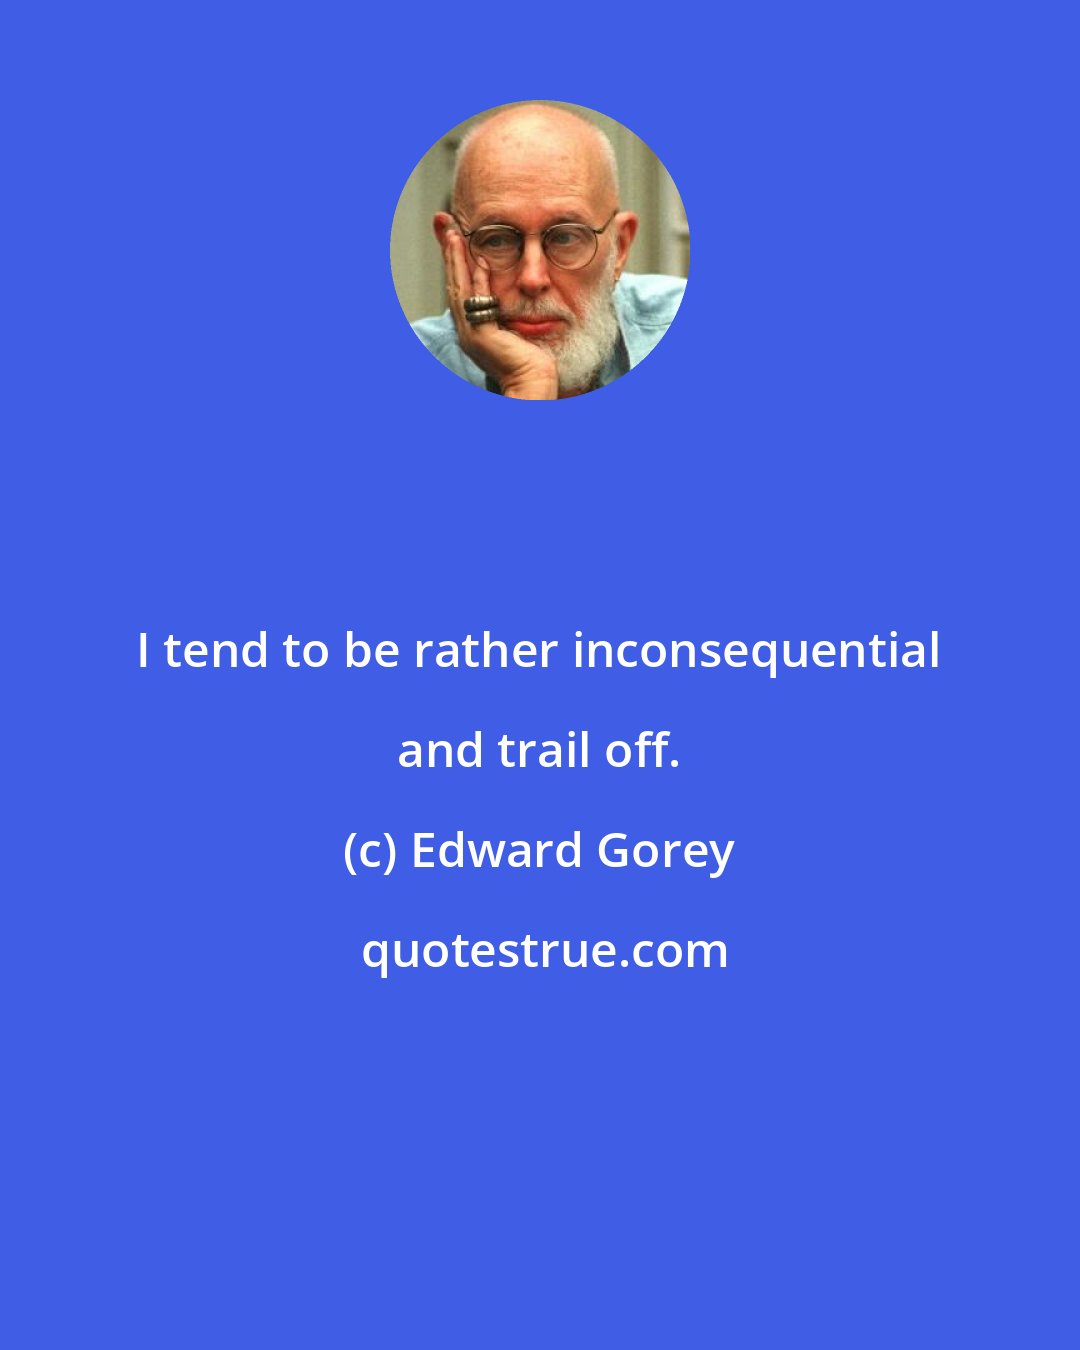 Edward Gorey: I tend to be rather inconsequential and trail off.